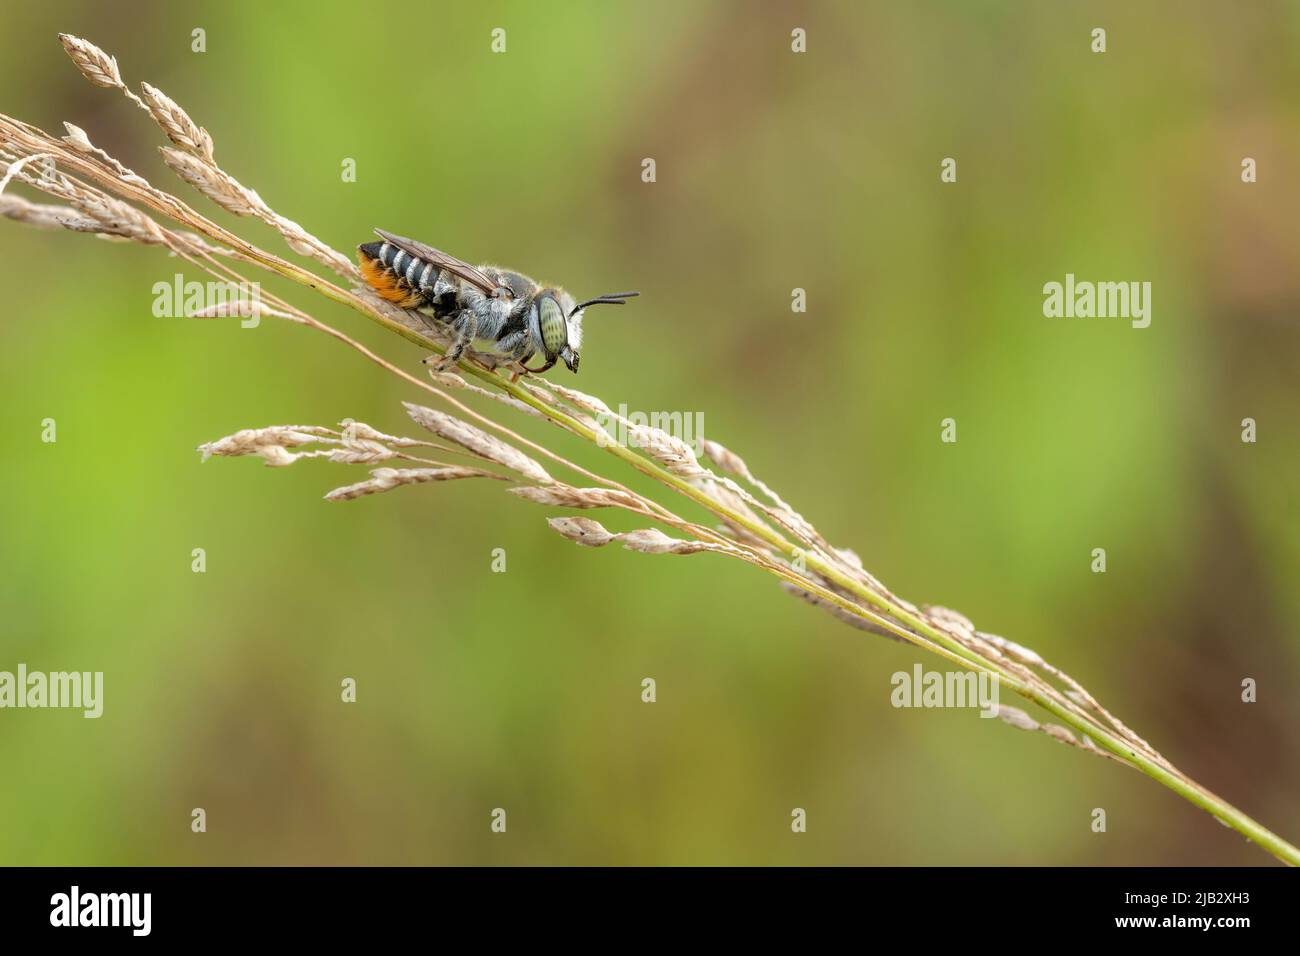 Leaf cutter bees resting on the grass Stock Photo